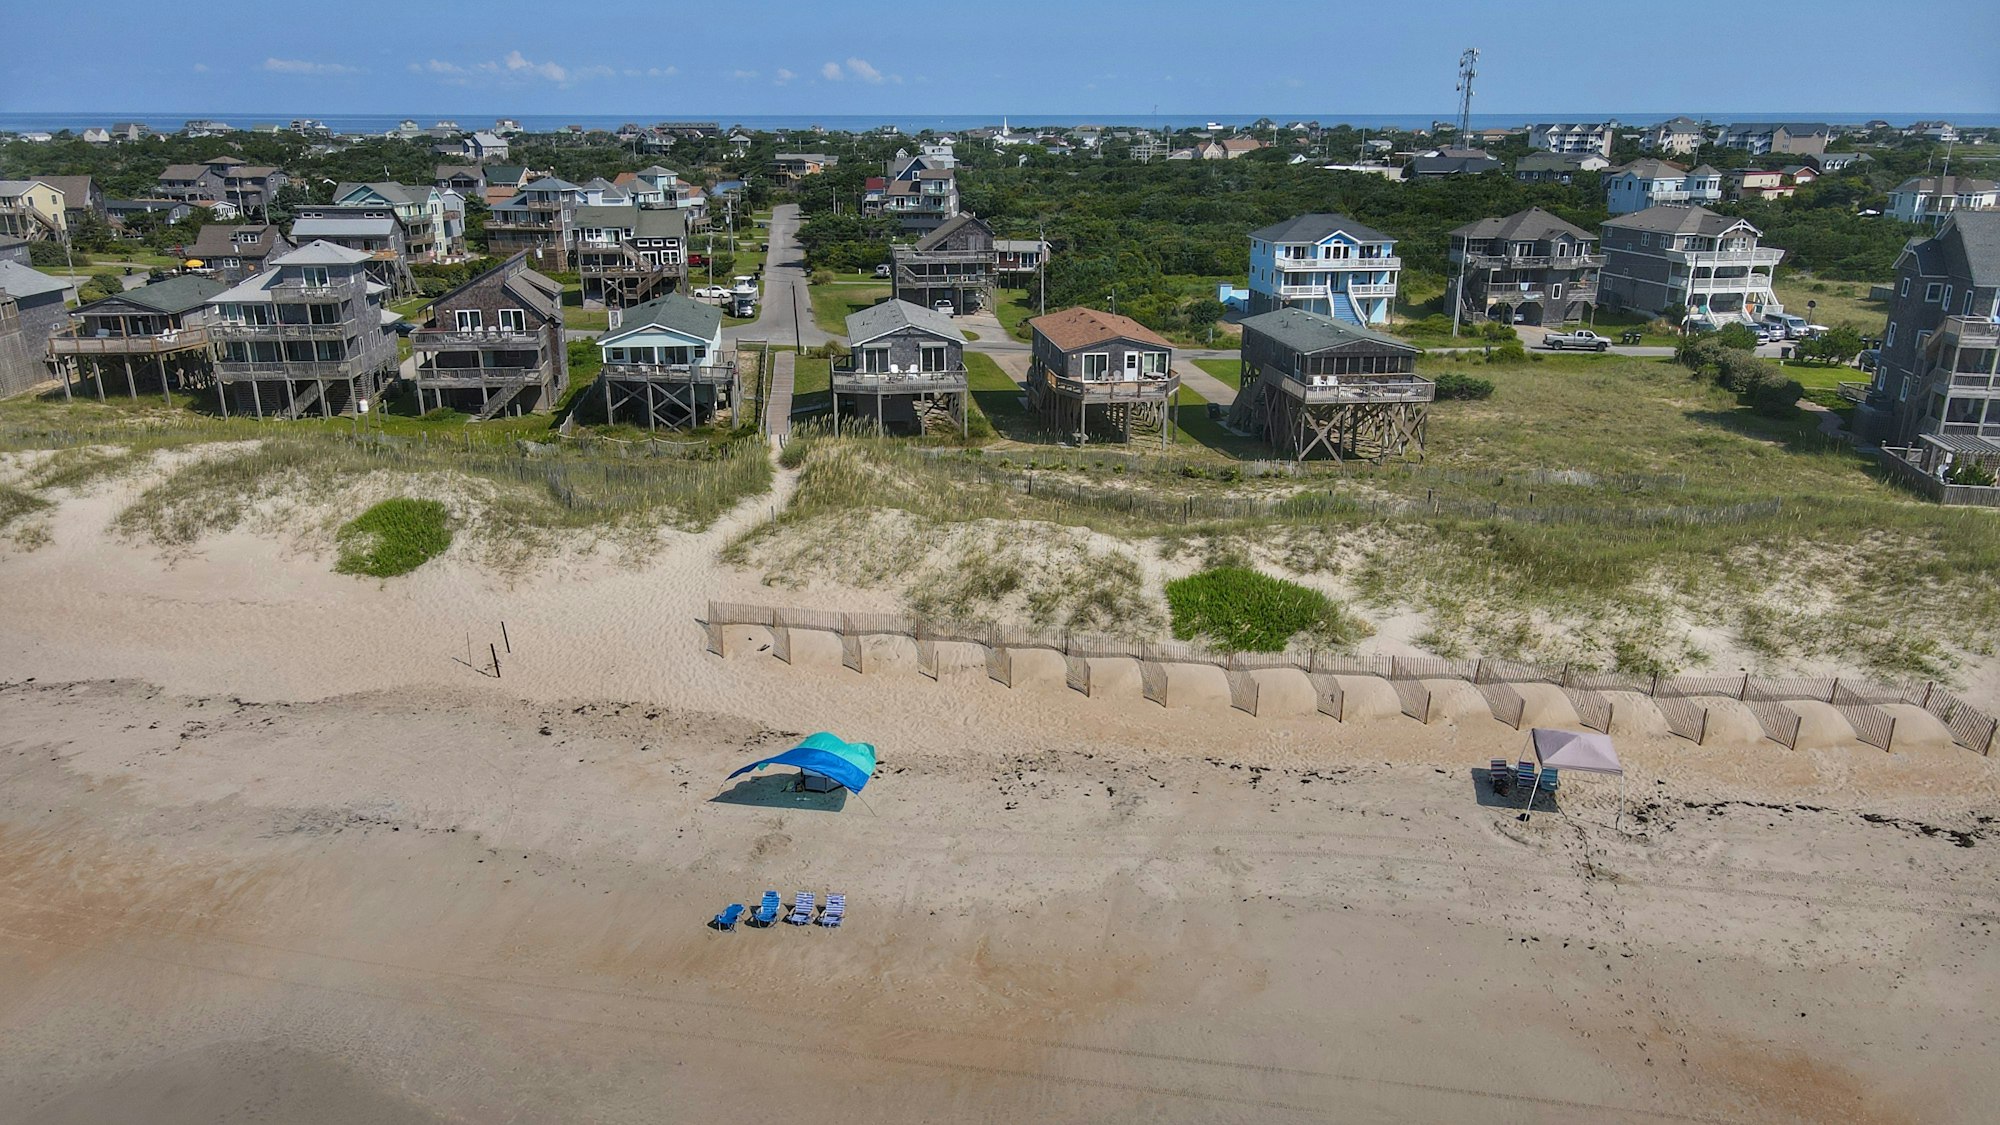 Beach homes in Hatteras Island along the Outer Banks of North Carolina.